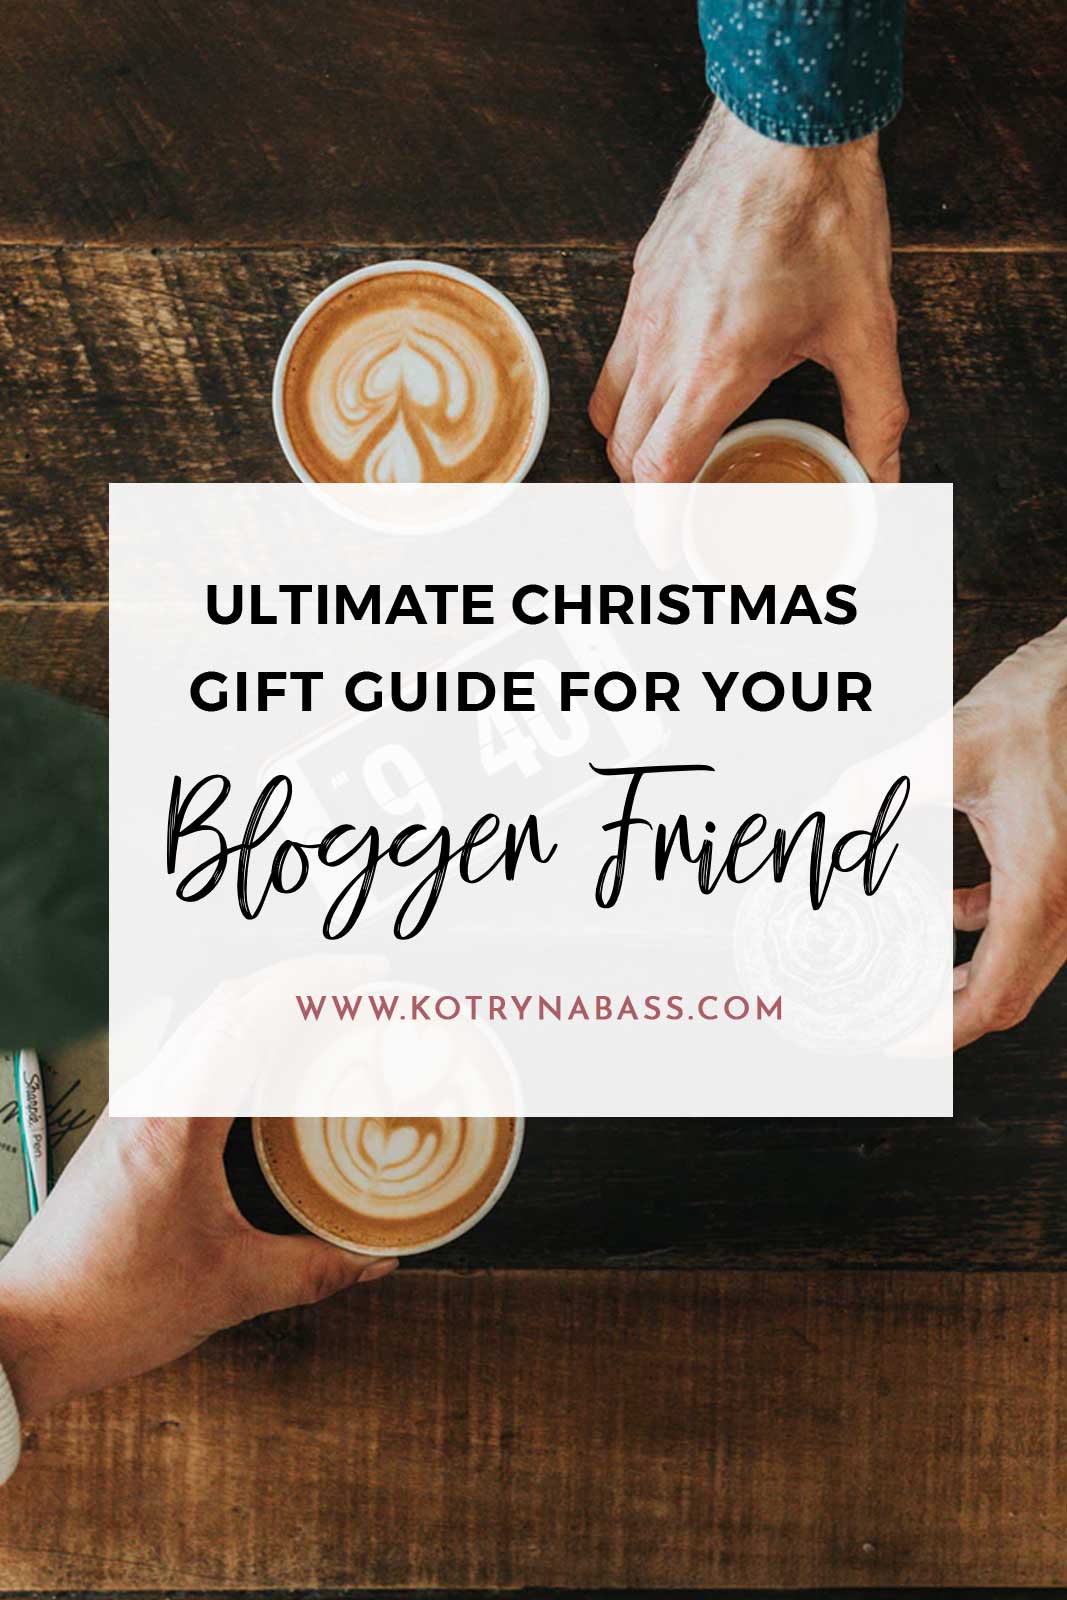 Christmas is almost around the corner and I’m here to help you out! If you have a friend who blogs and you have no idea what to gift to this creative human being- you came to the right place. I can assure you than anything mentioned in this post will be greeted with smiles and perhaps even a couple tears of joy! Are you ready?